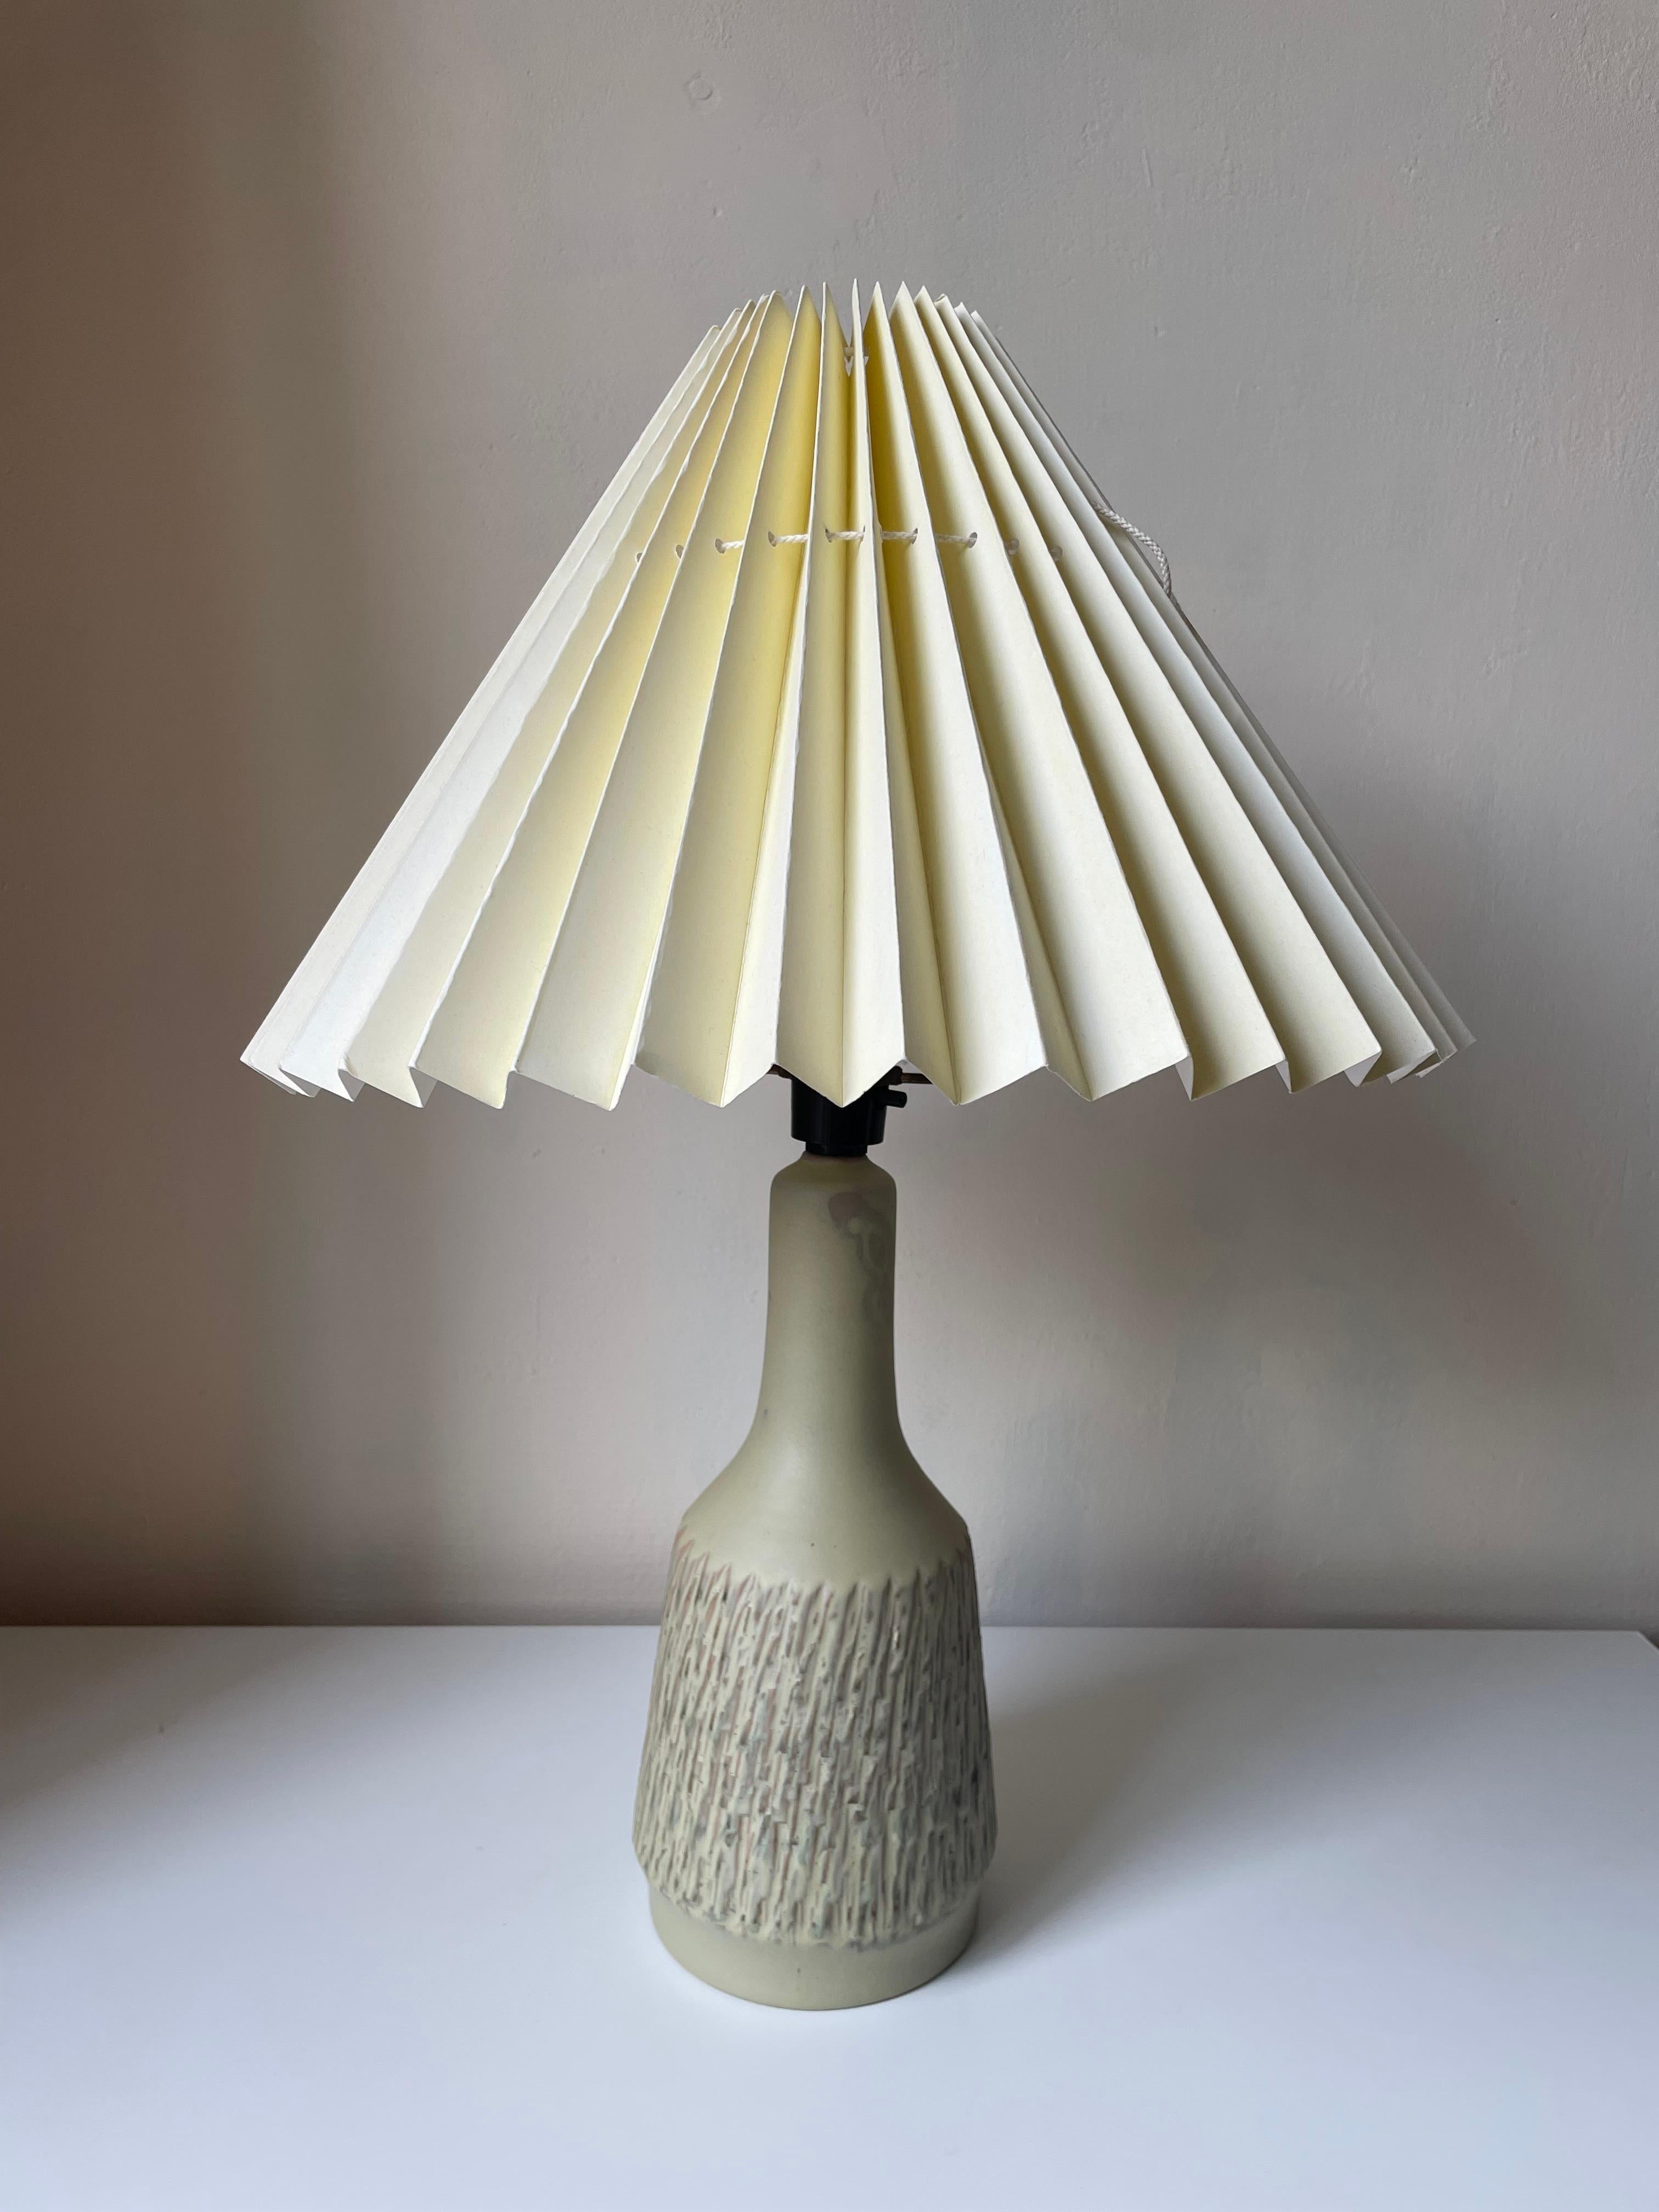 Light Green Textured Ceramic Table Lamp, 1960s For Sale 6